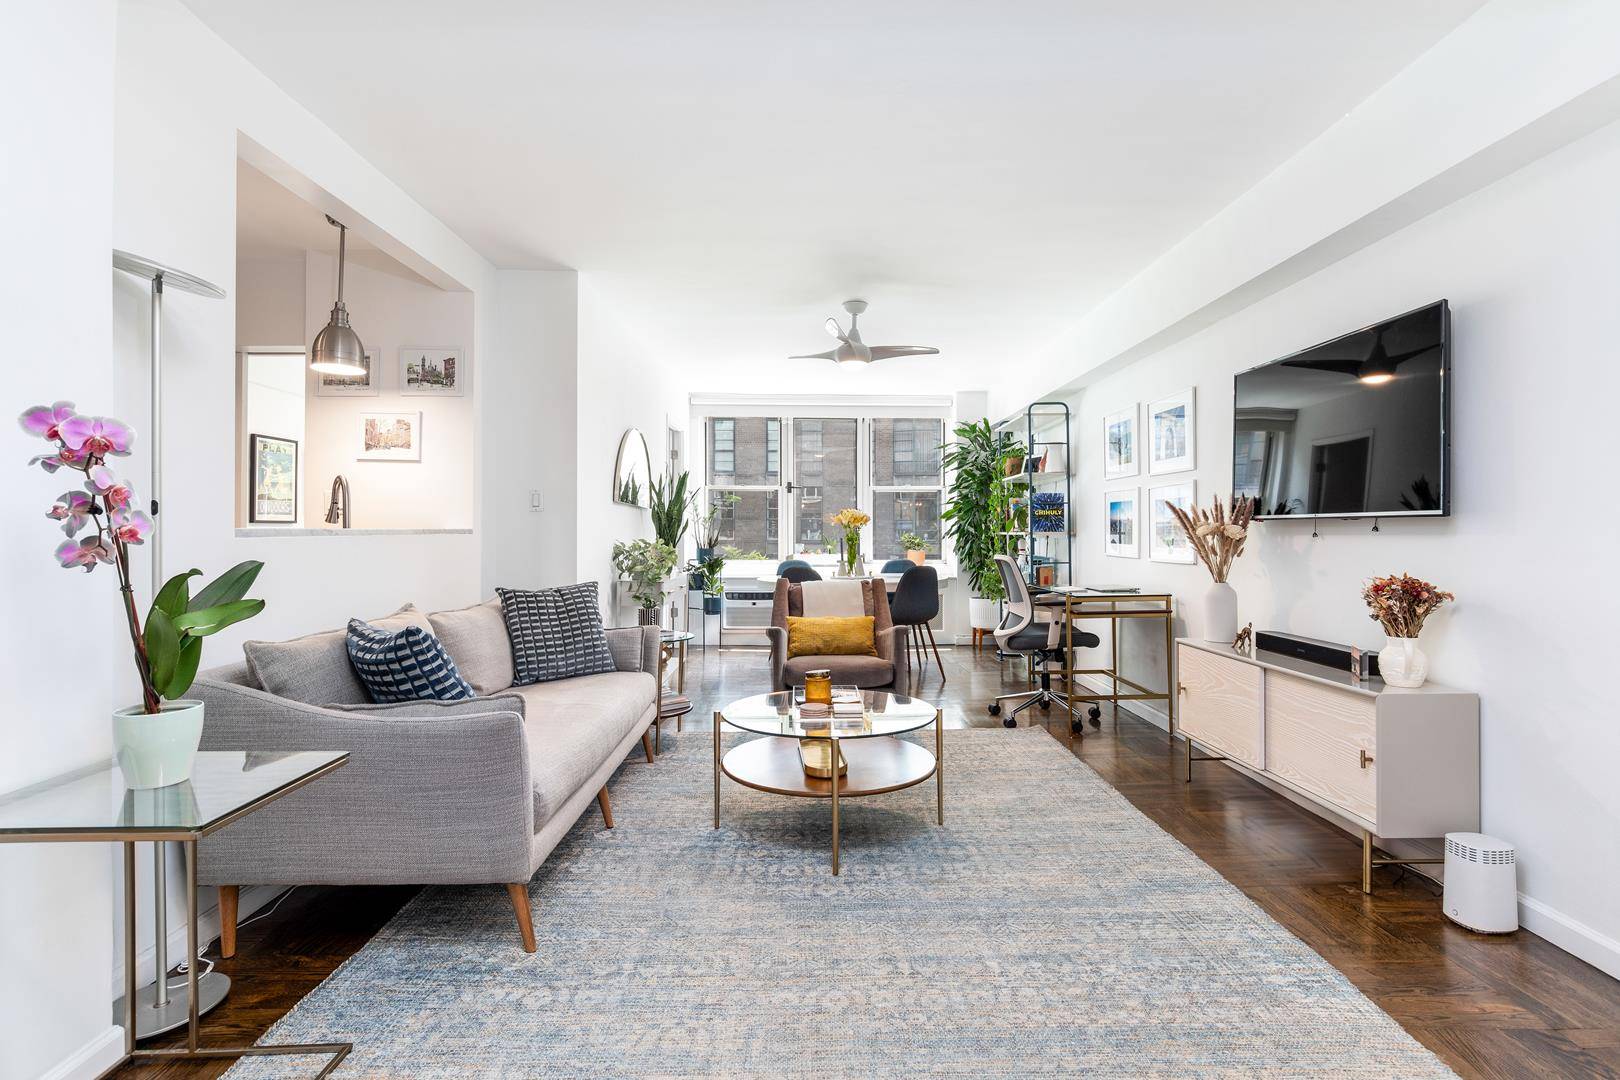 A rare opportunity to purchase a renovated and spacious two bedroom one bathroom home with bright, southern exposure in the heart of Greenwich Village !